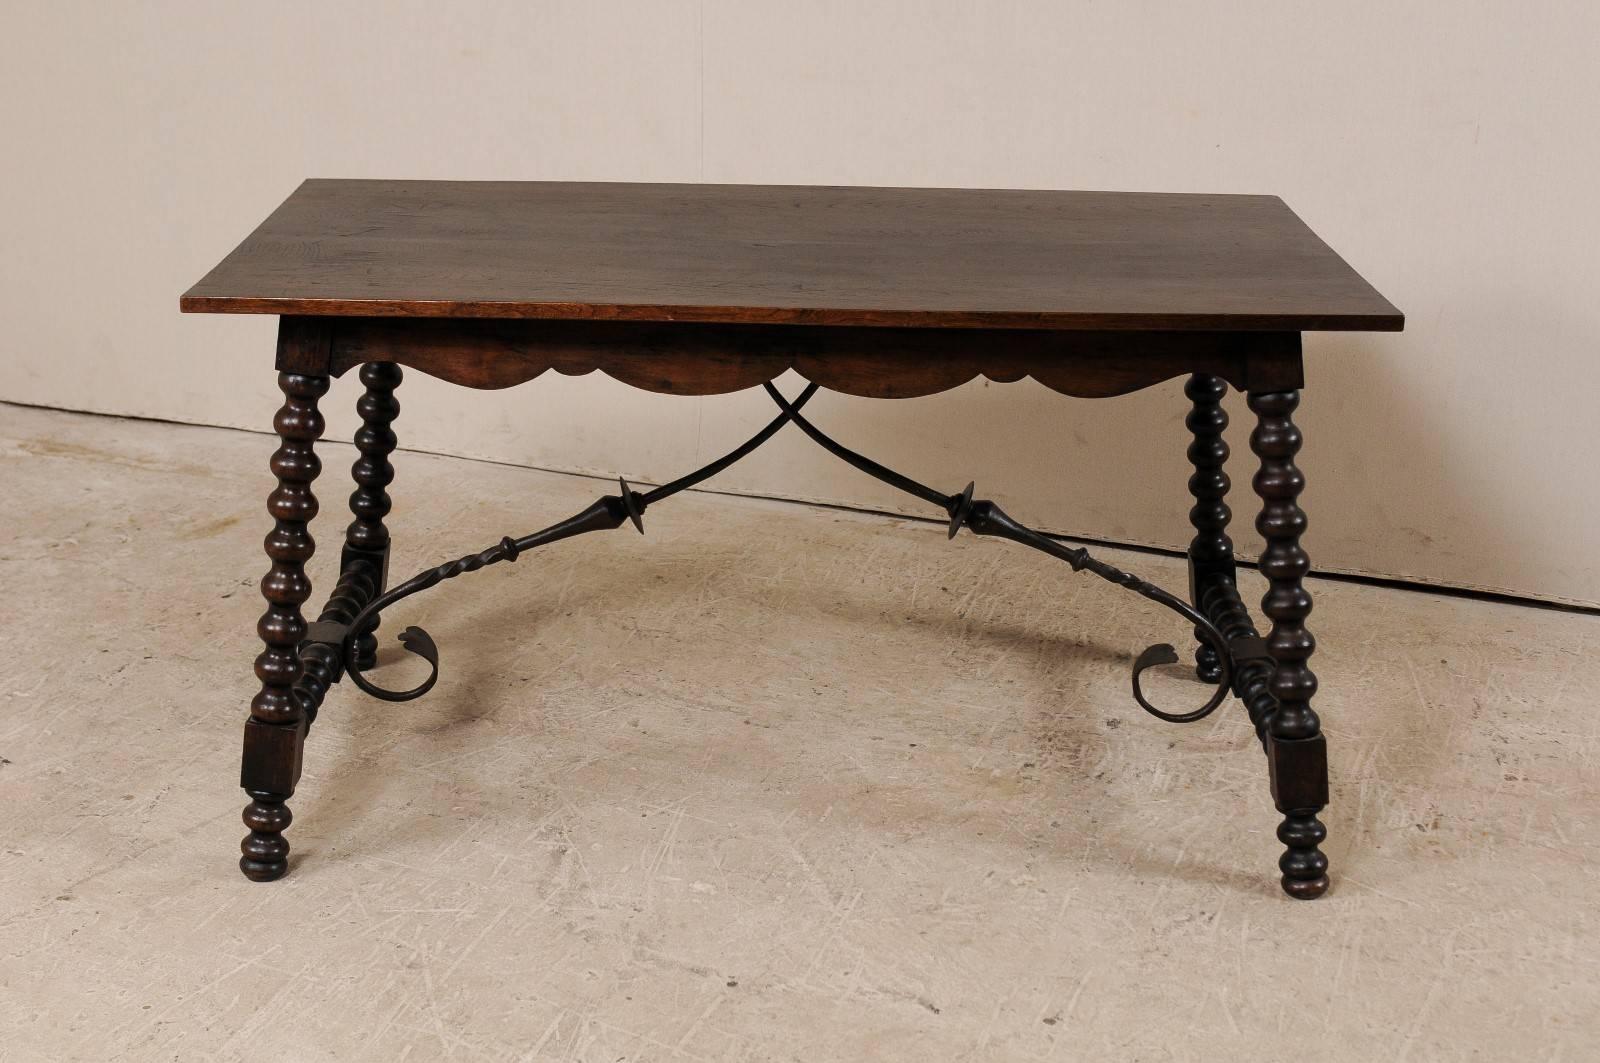 A Spanish 19th century wood an iron stretchered table. This antique Spanish table features a rectangular-shaped top which rests above it's beautifully scalloped apron. This table has outwardly tilting bobbin carved legs, which are supported with